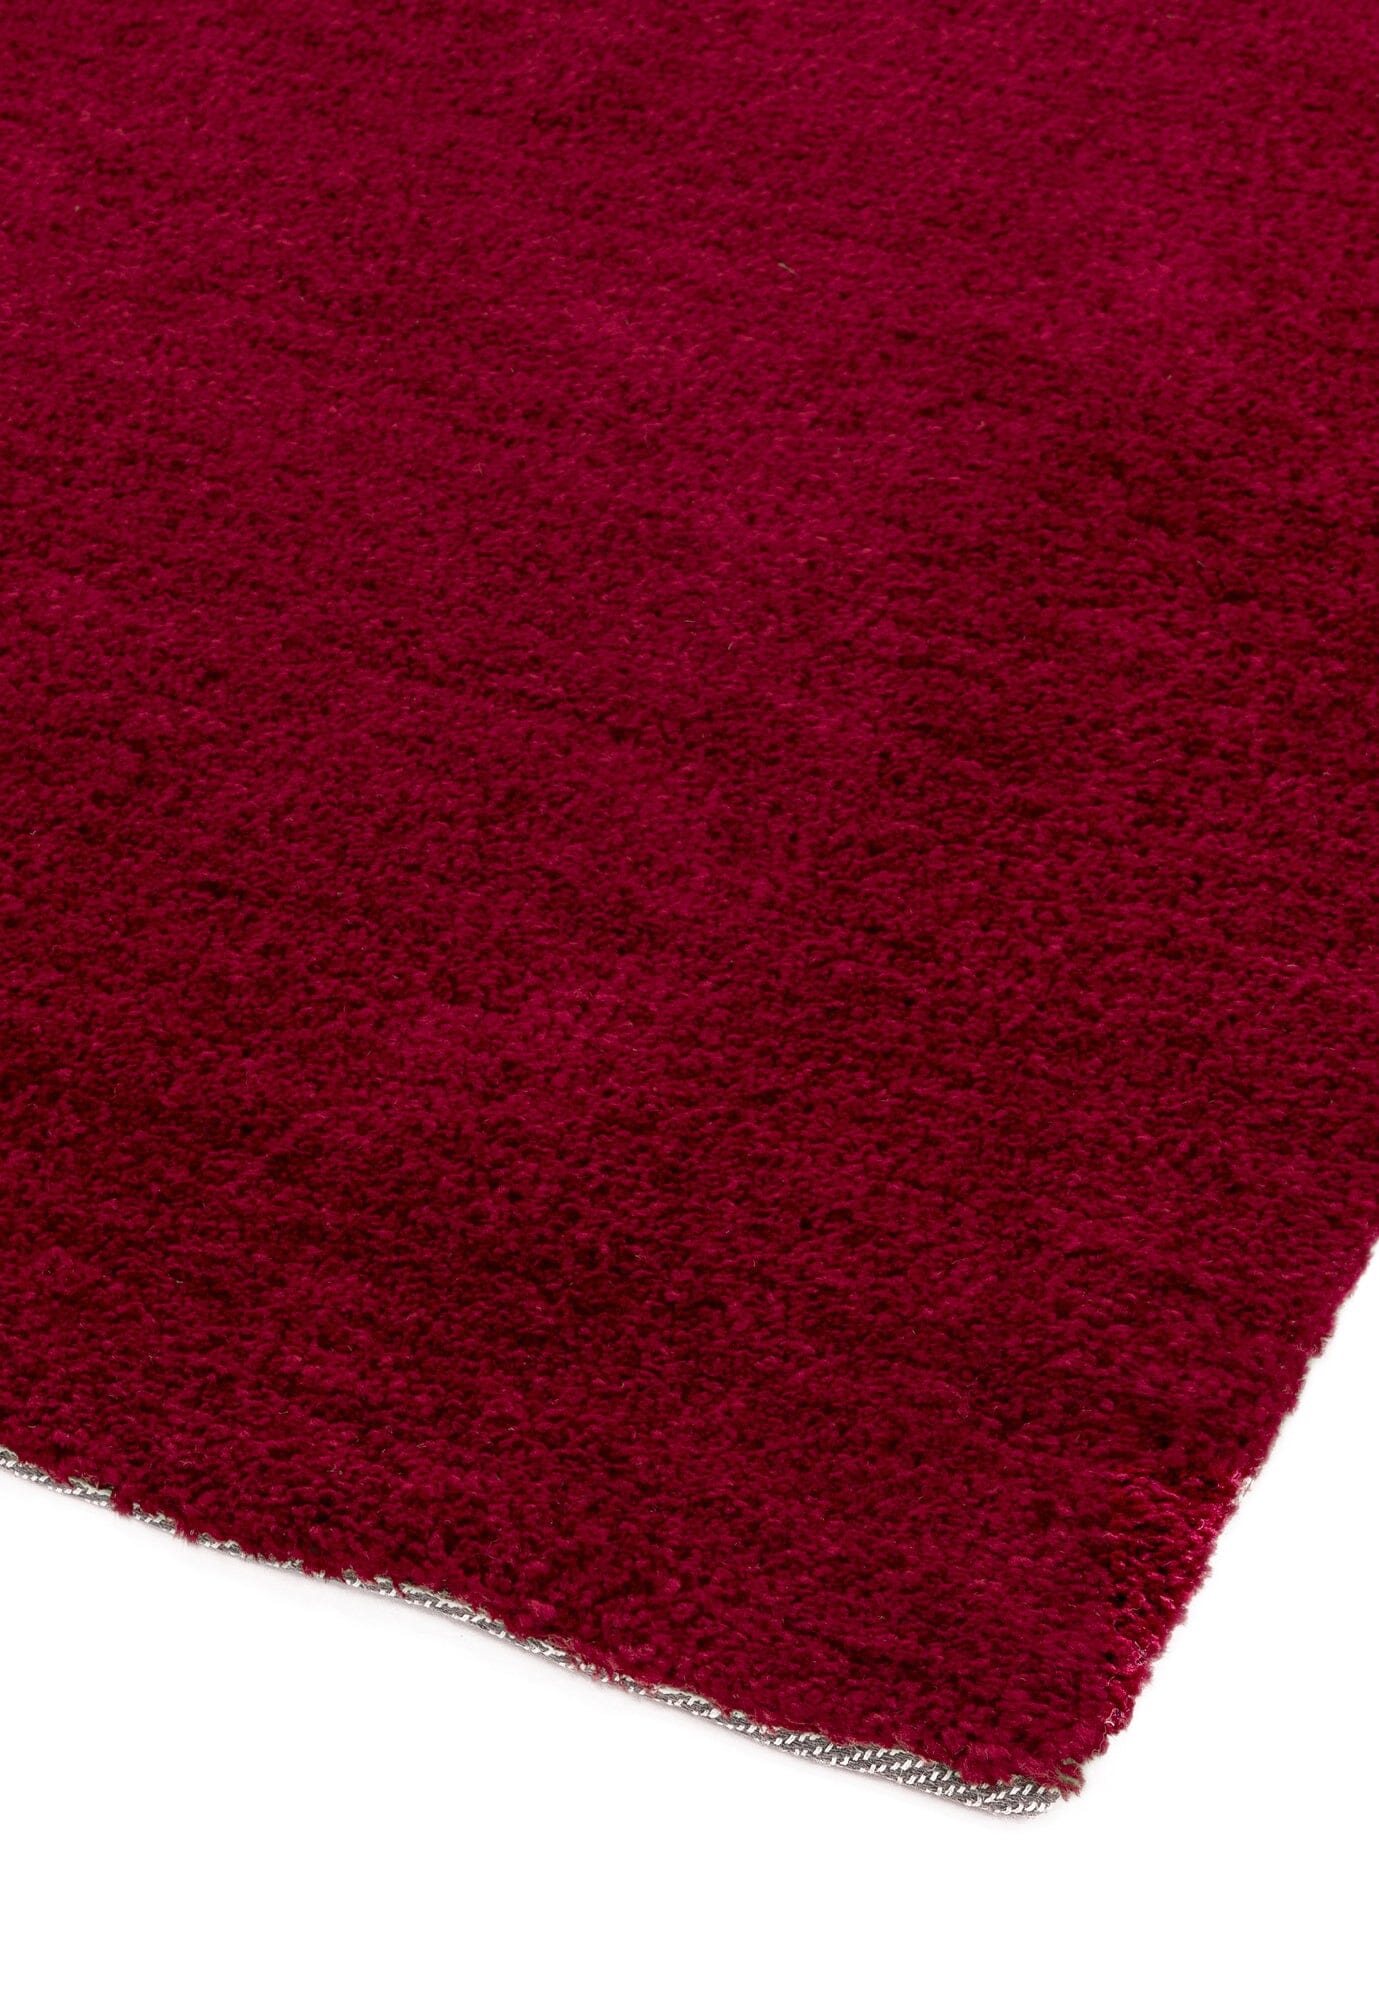  Asiatic Carpets-Asiatic Carpets Milo Table Tufted Rug Berry - 160 x 230cm-Red 773 